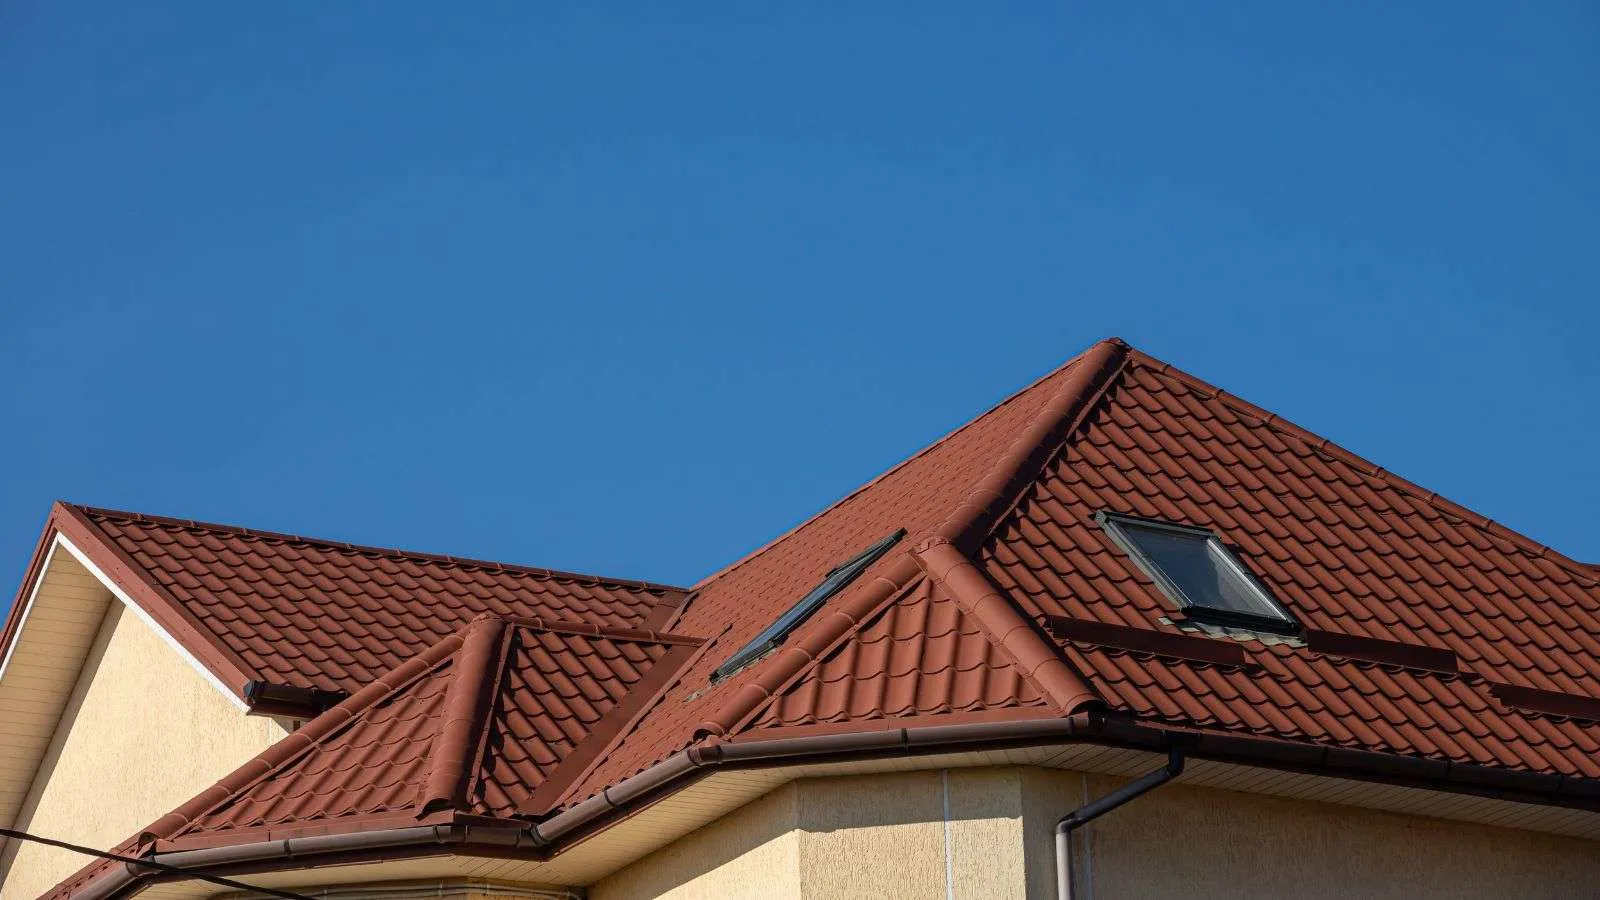 do certain roof architectural styles influence depreciation - bighomeprojects.com